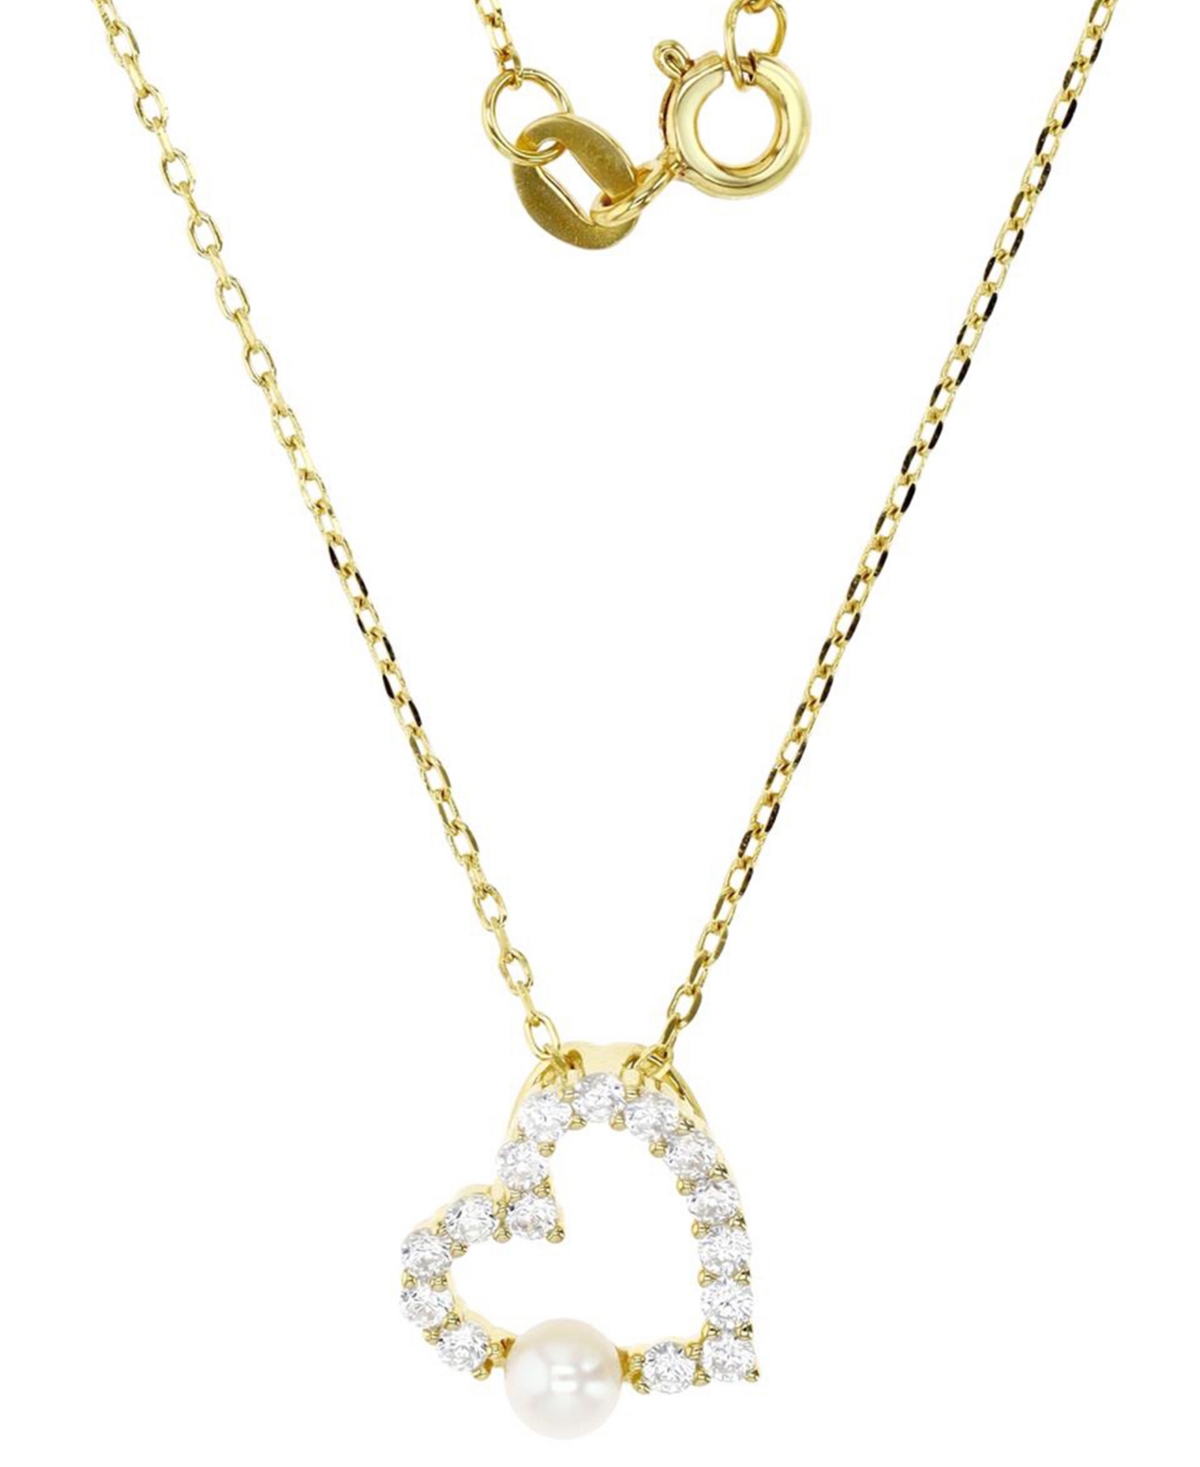 Cubic Zirconia & Imitation Pearl Open Heart Pendant Necklace in 14k Gold-Plated Sterling Silver, 16" + 2" extender - Gold